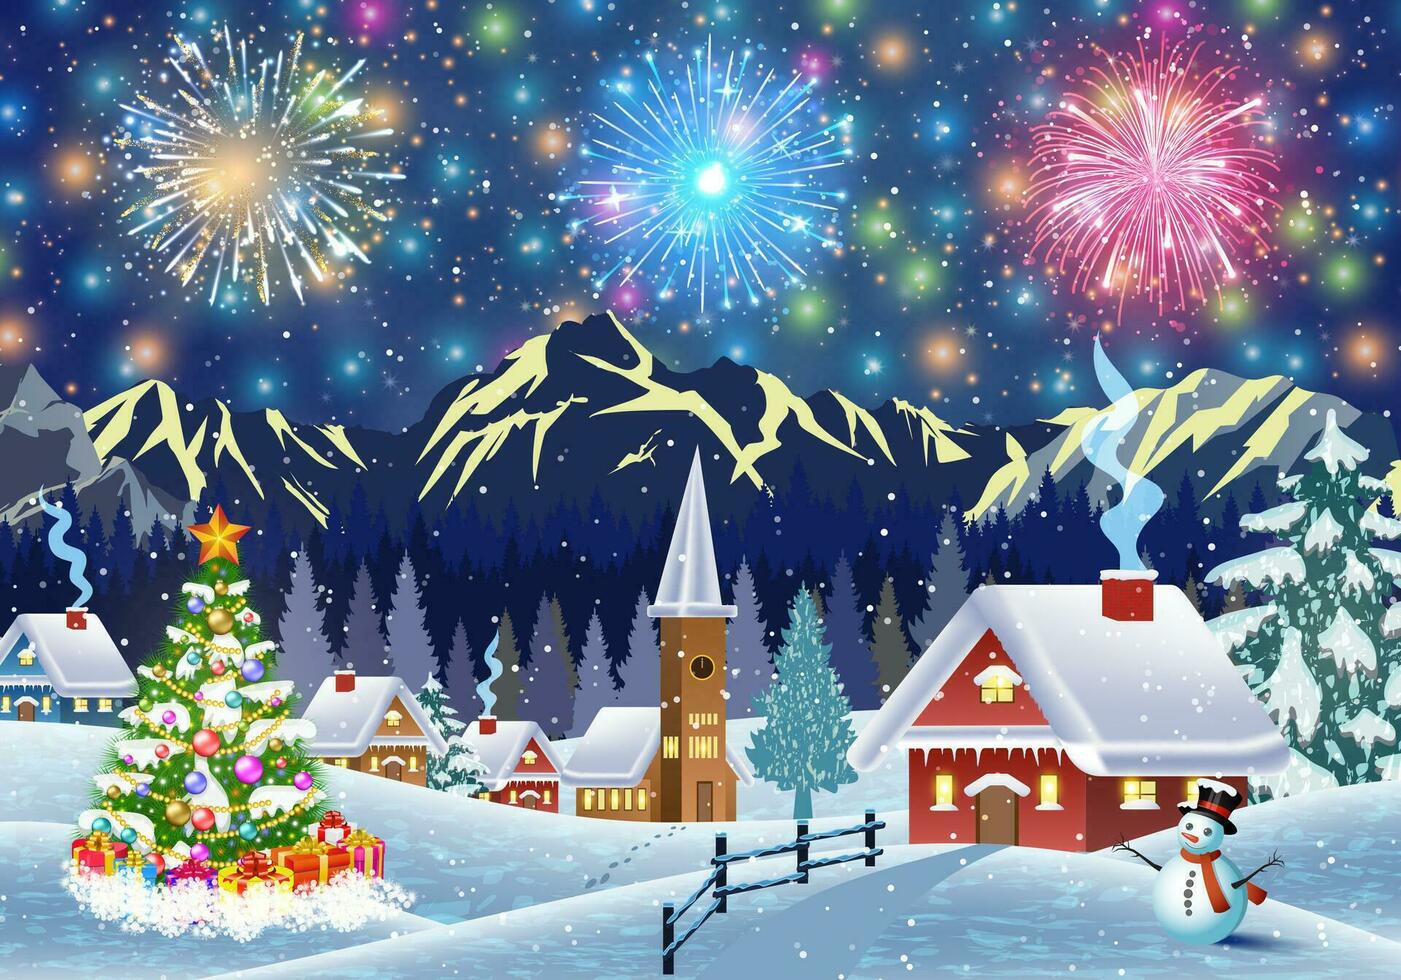 house in snowy Christmas landscape at night vector